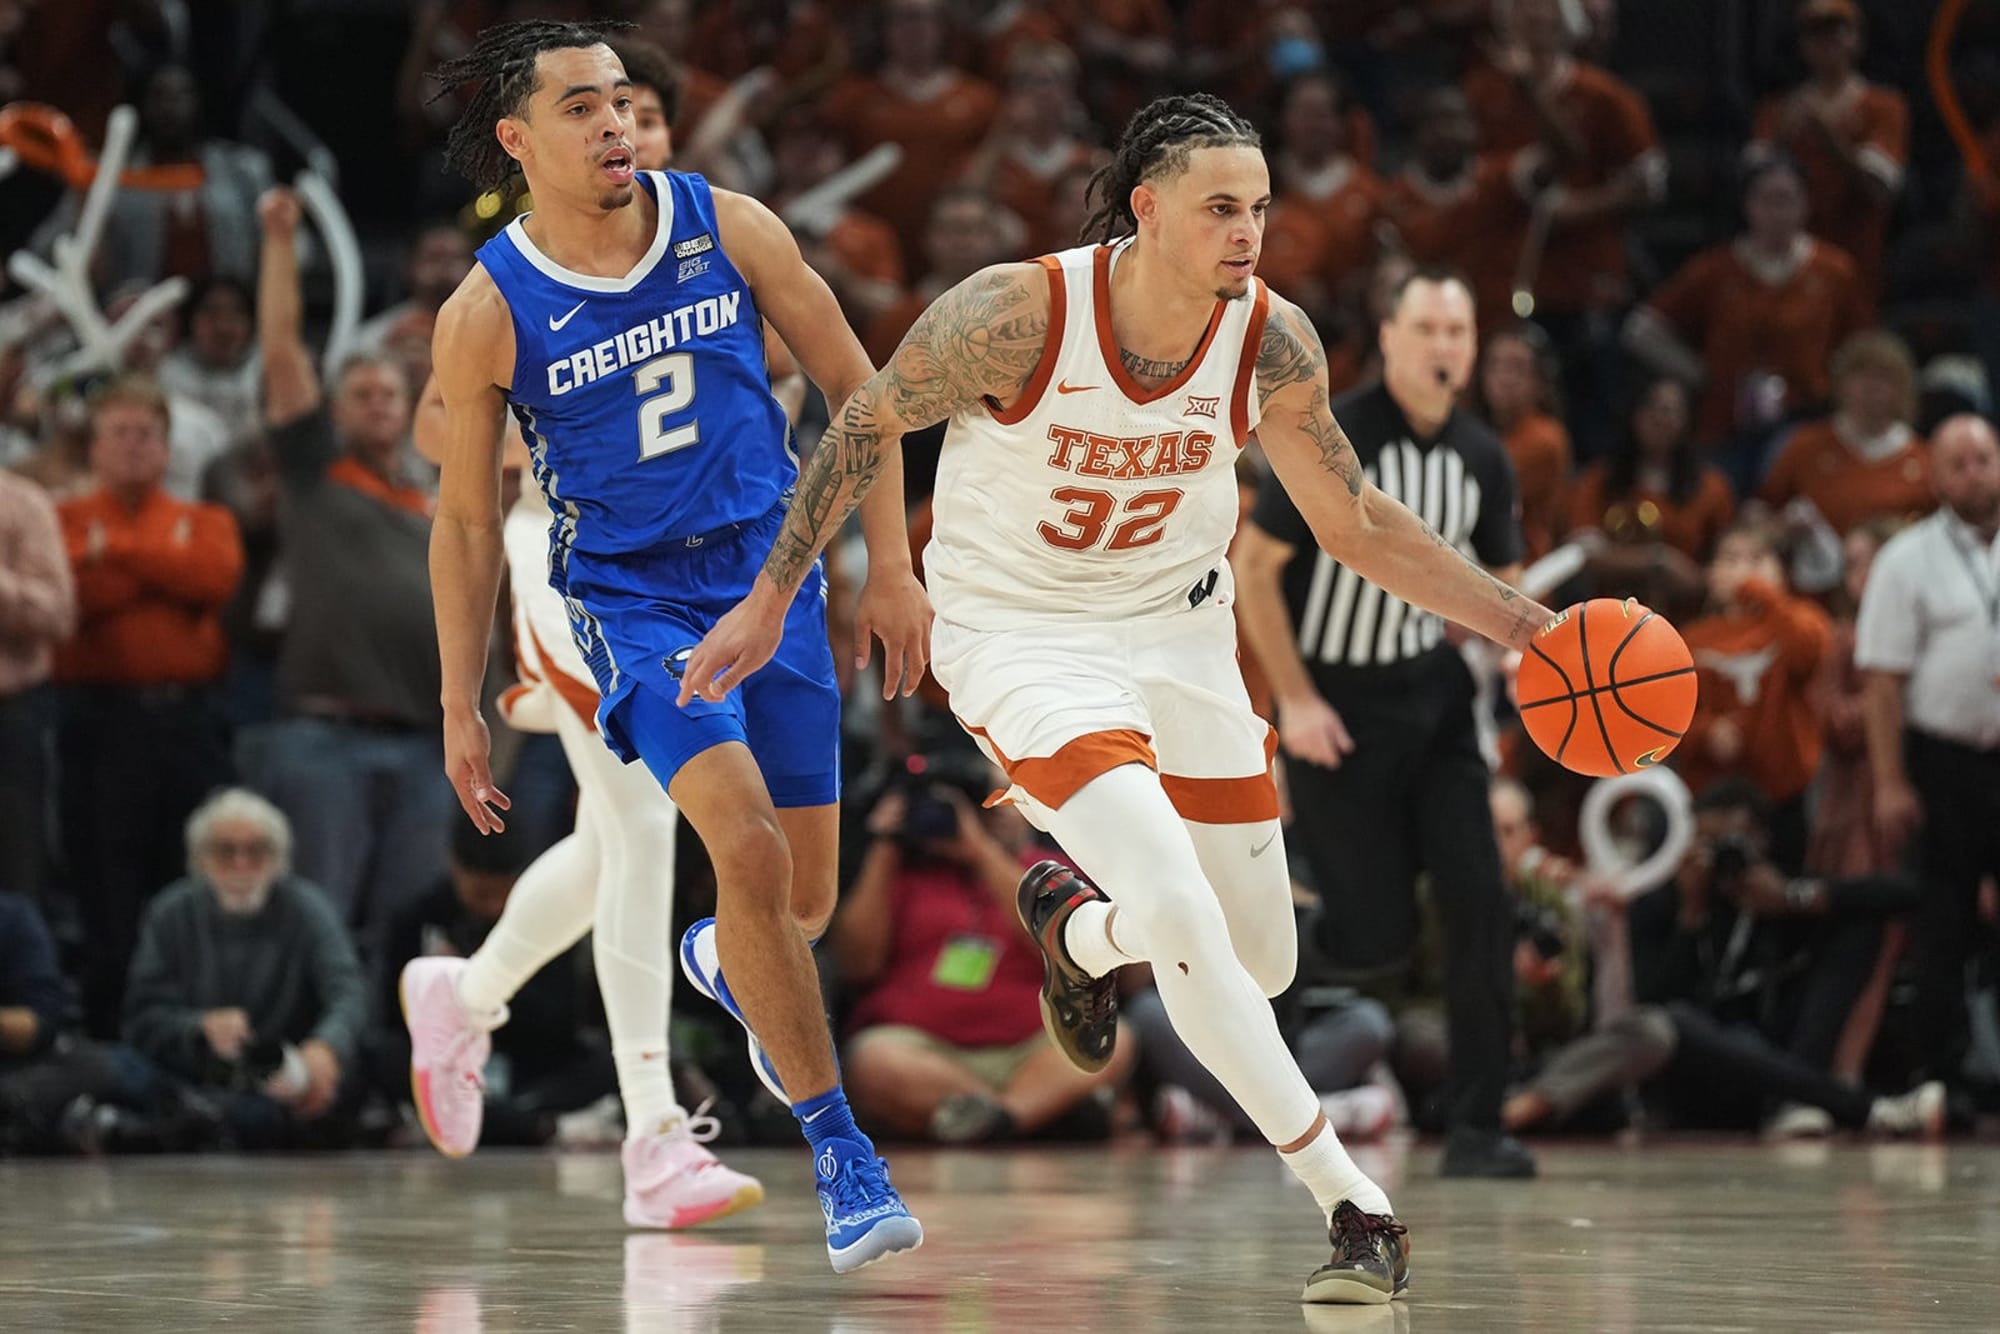 Texas basketball: 5 things to watch for vs Arkansas-Pine Bluff